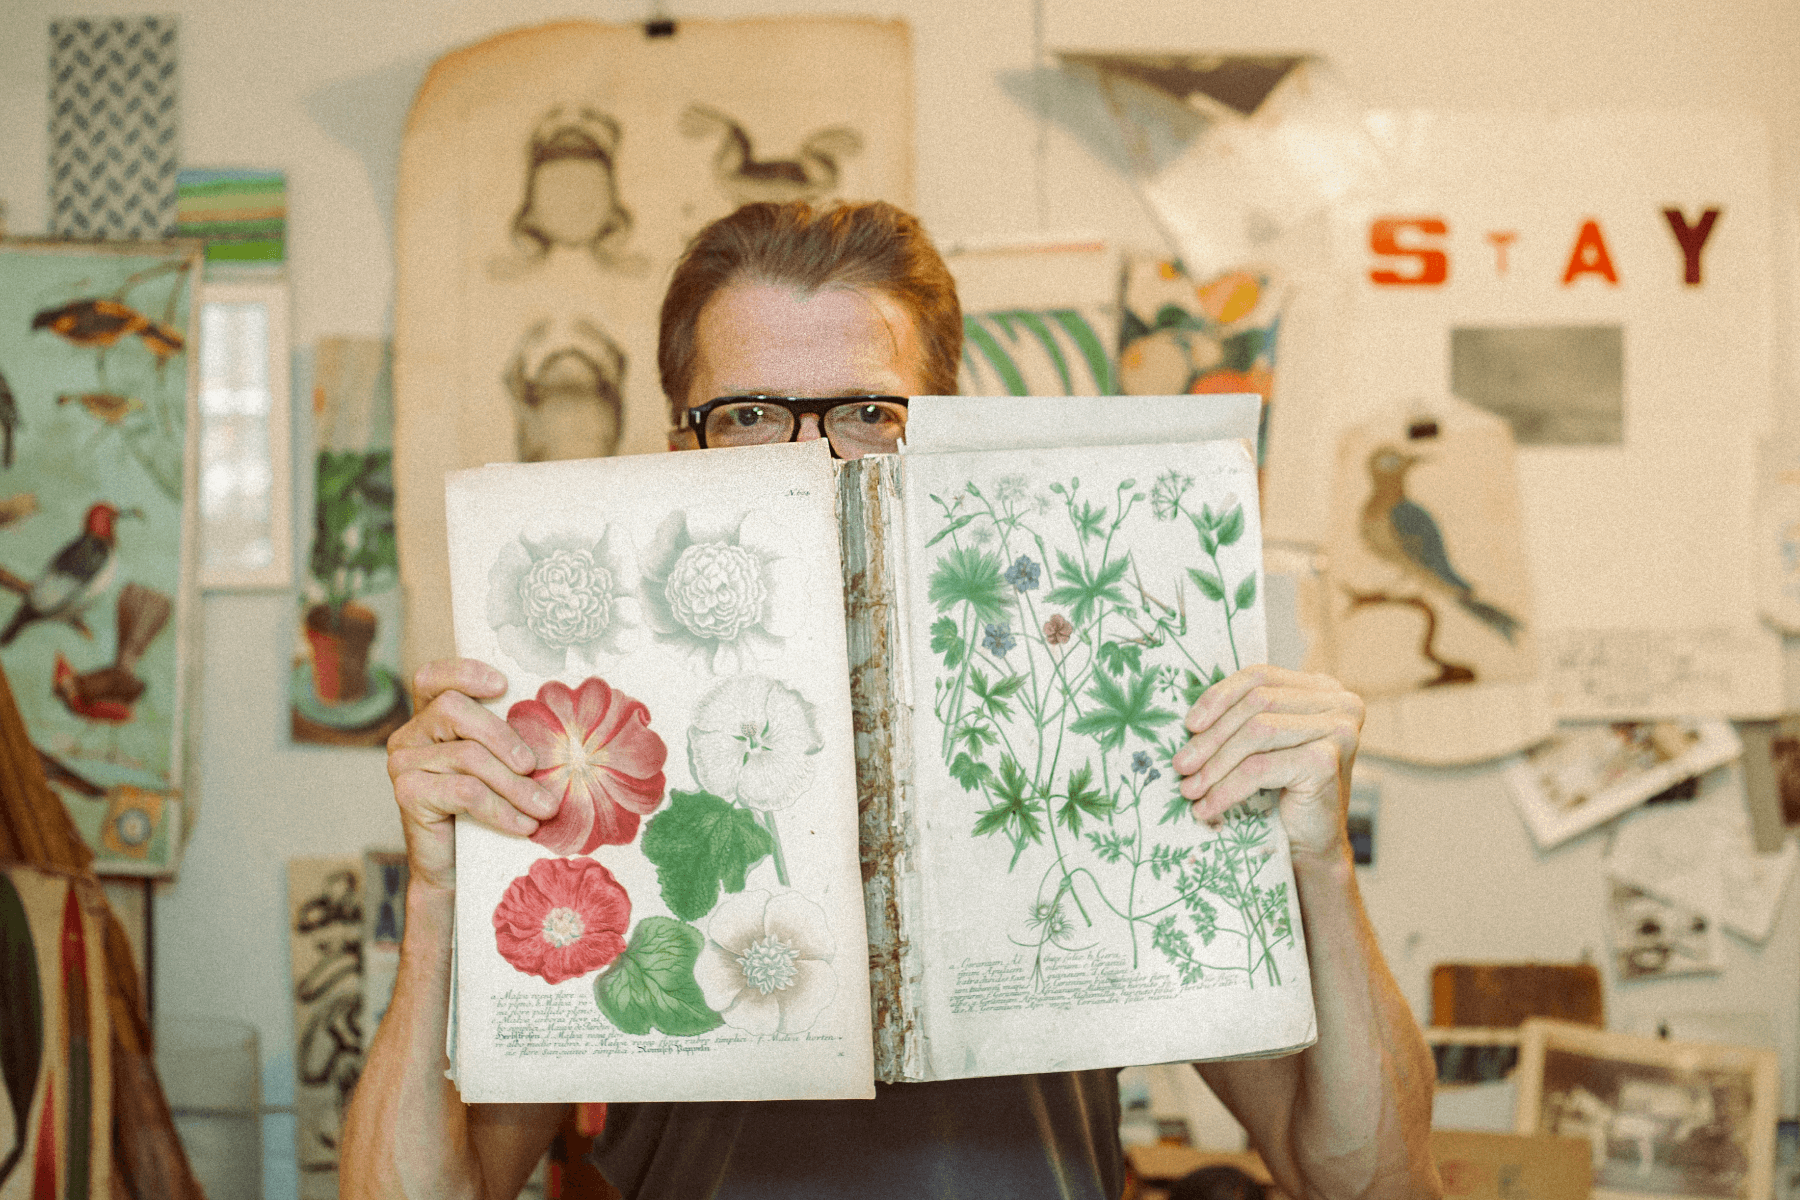 John Derian stands inside his studio holding up an archival book of illustrated flowers while standing in front of a wall covered with other illustrated drawings. 